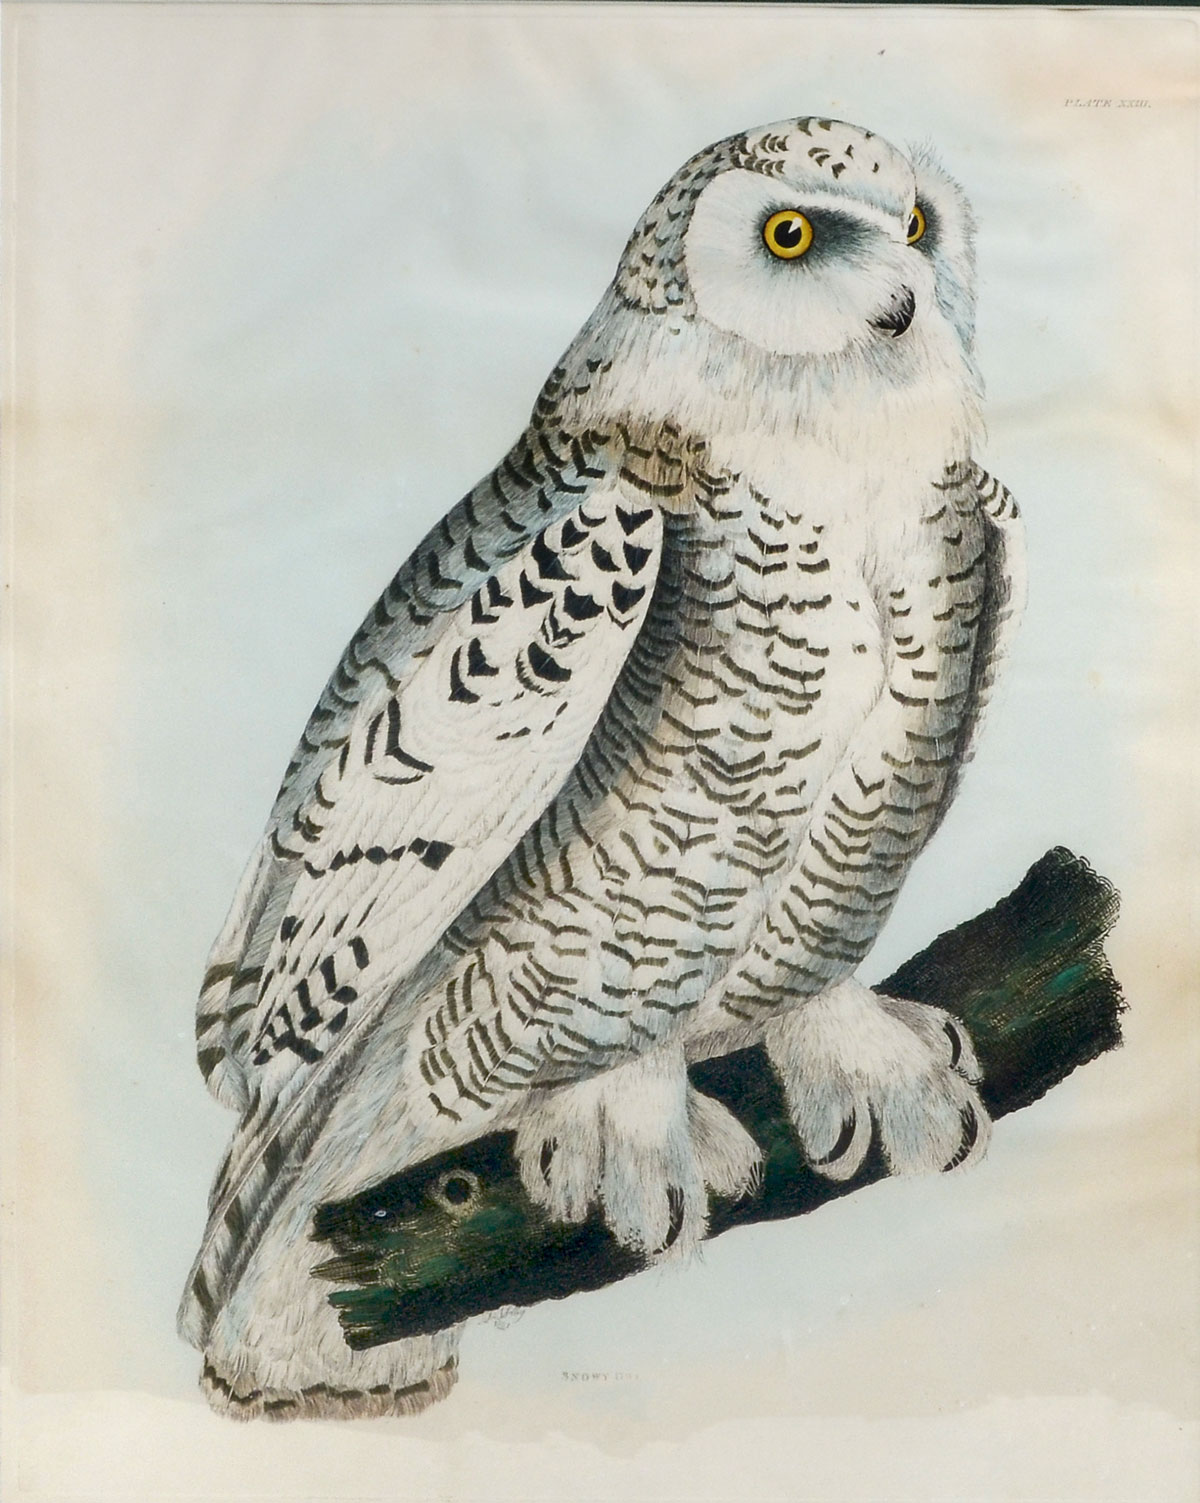 SNOWY OWL ENGRAVING BY SELBY: sight